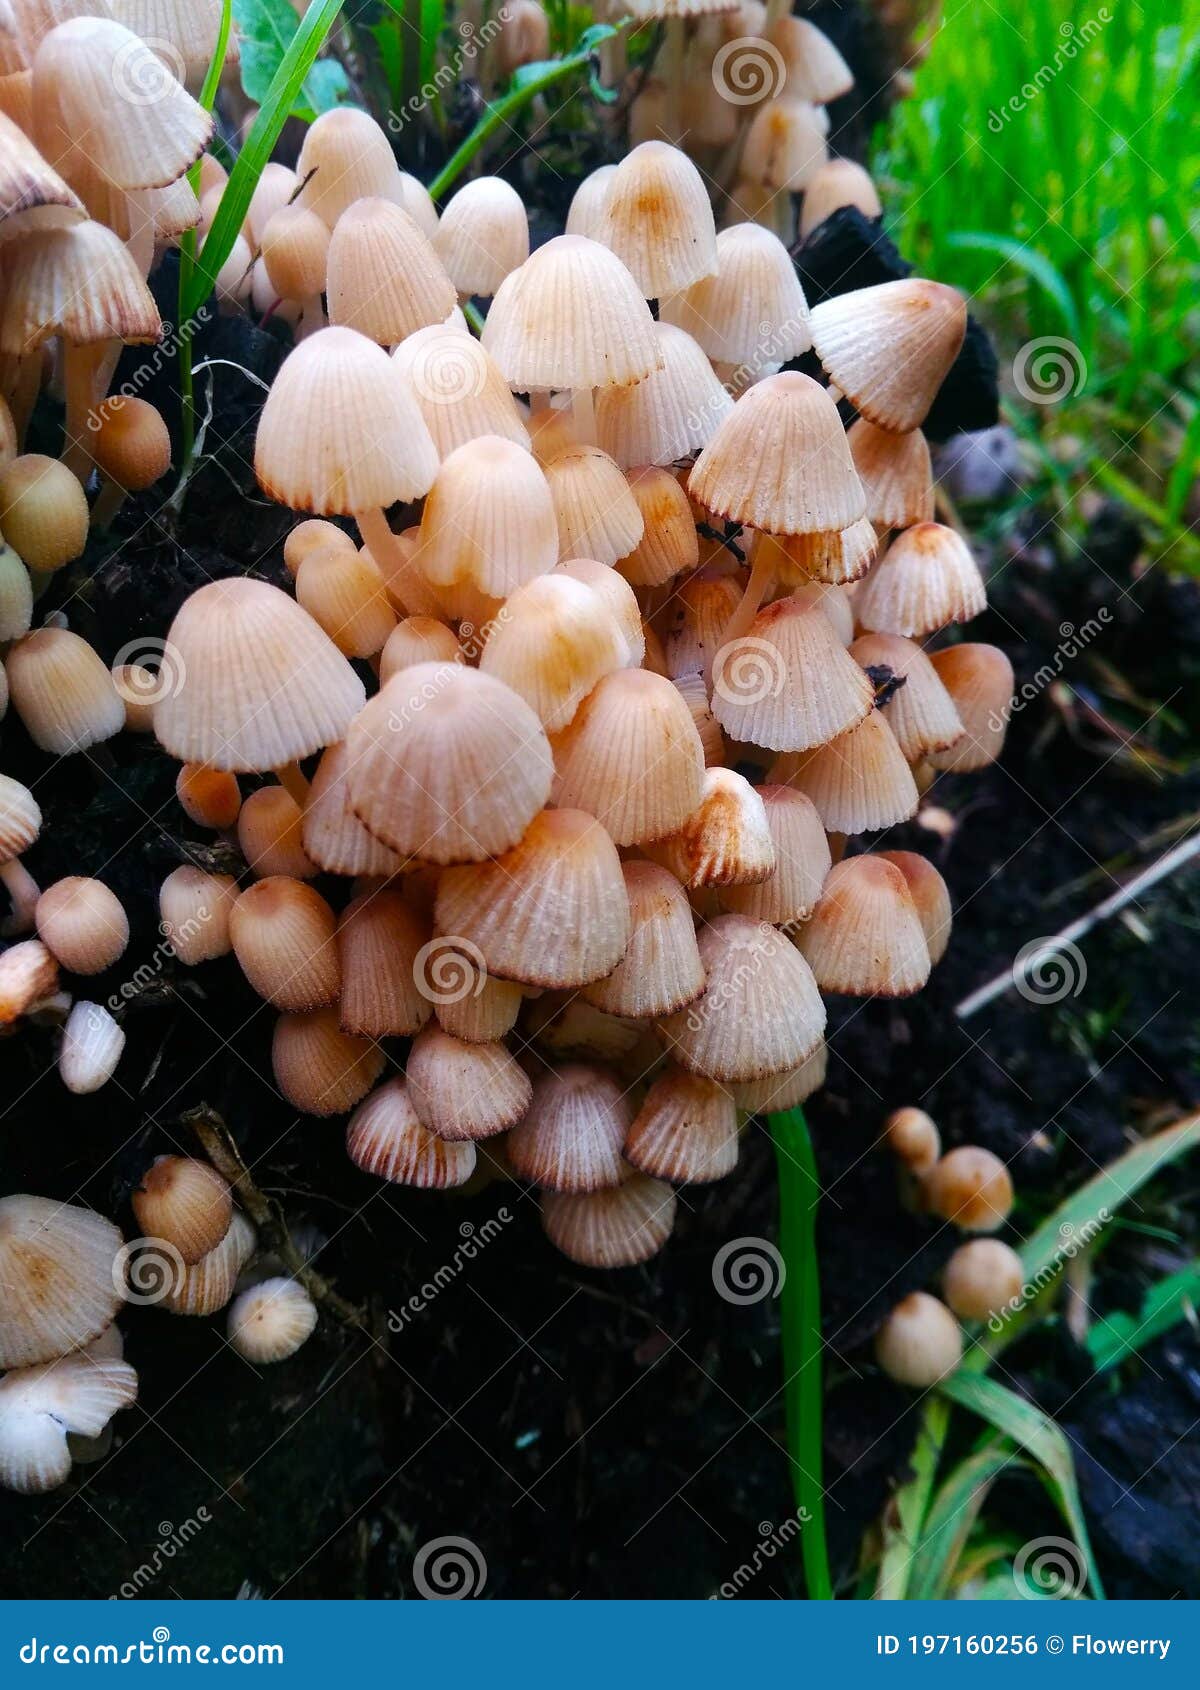 coprinellus disseminatus commonly known as trooping crumble cap, fairy inkcup. a lot of tiny mushrooms on a tree stump